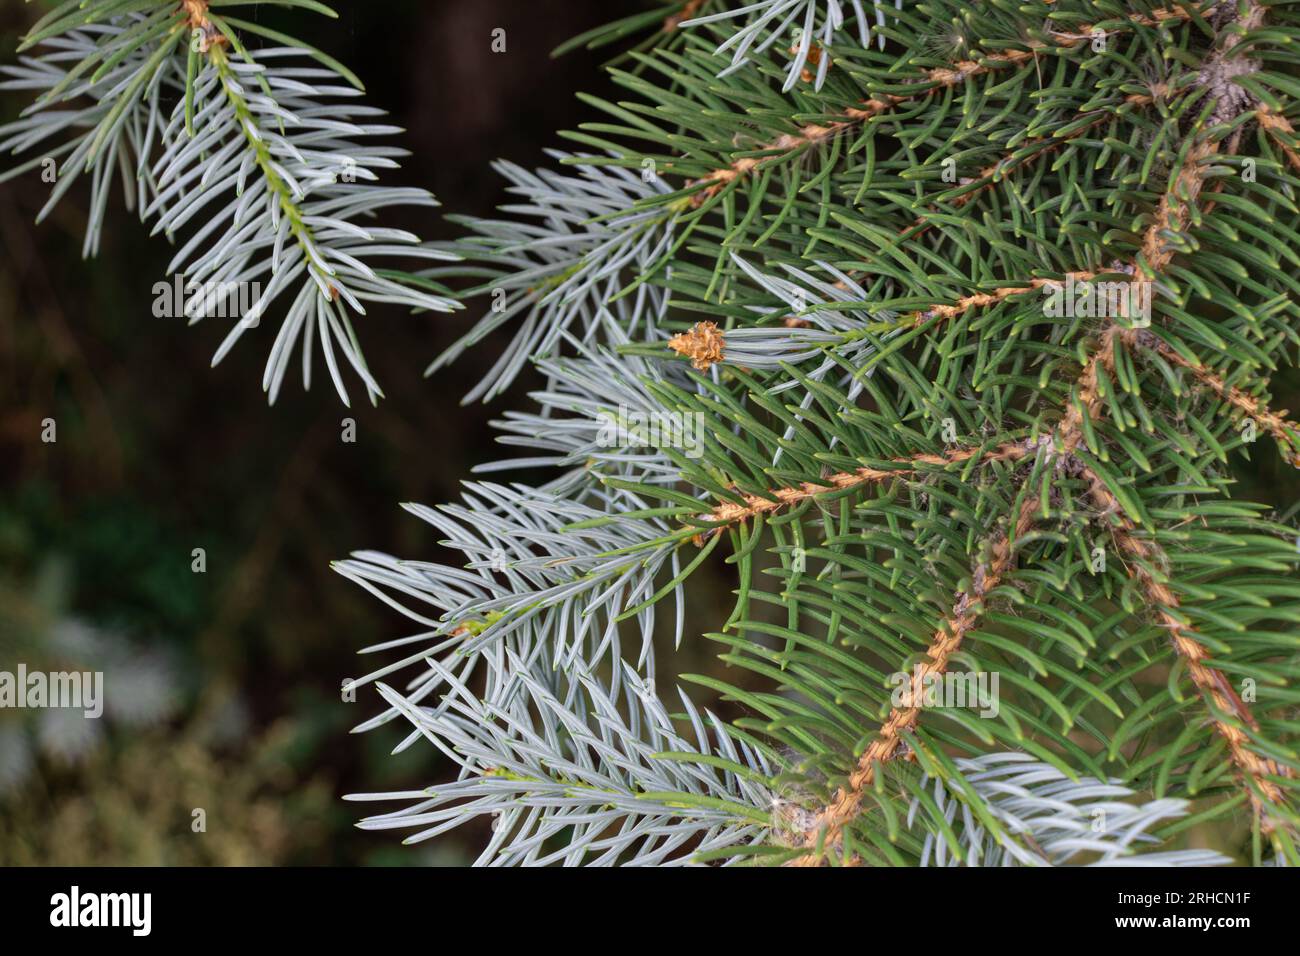 Close-up of pine tree branch with green and white needles and brown pine cones on forest floor background Stock Photo